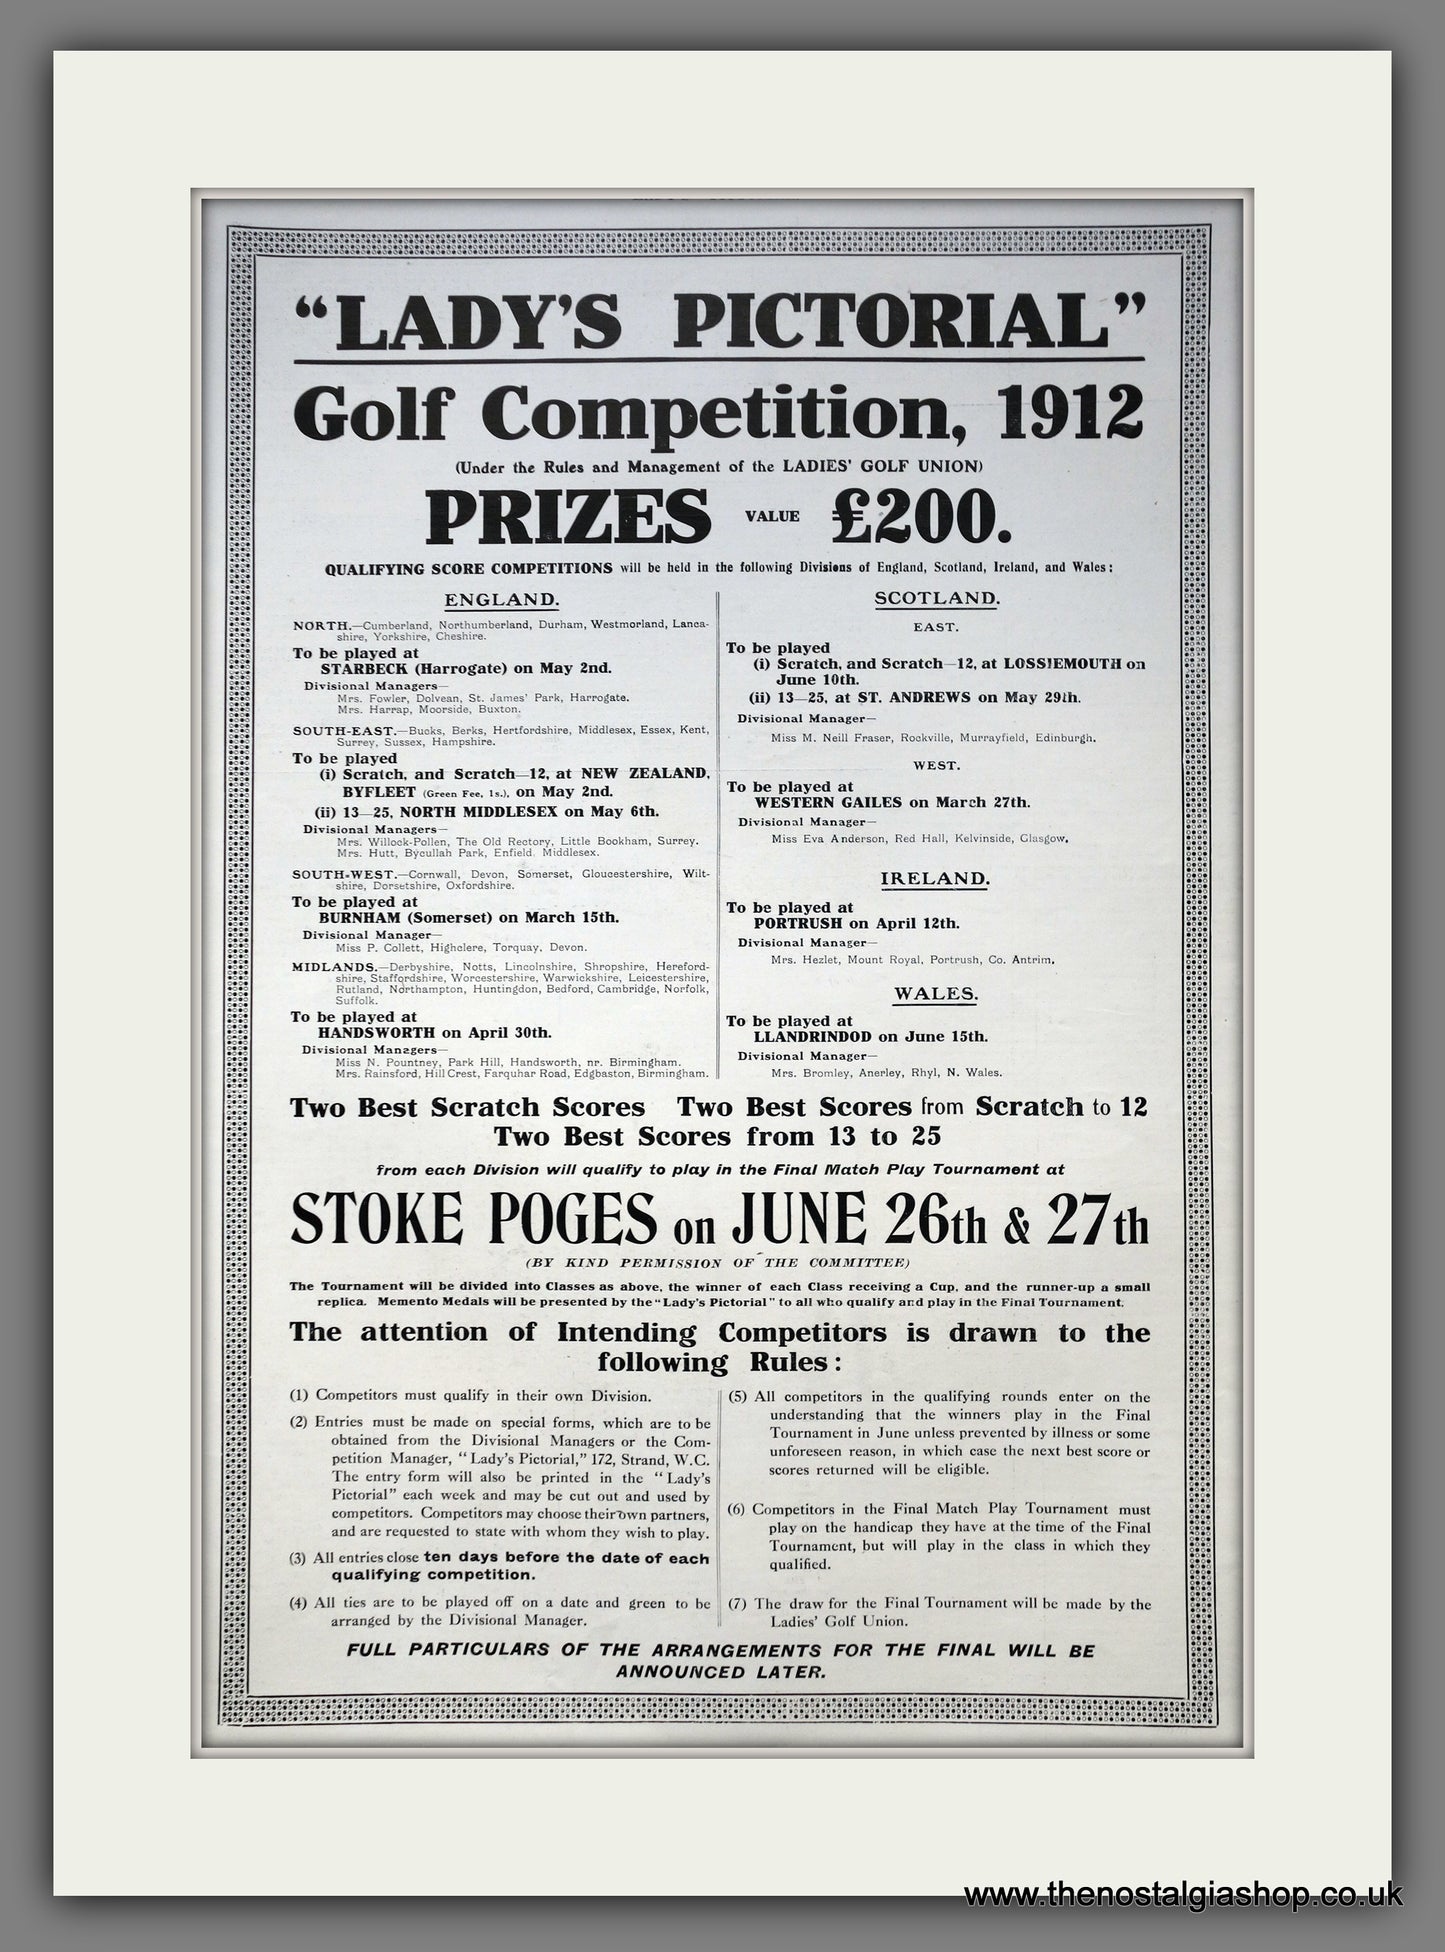 Lady's Pictorial Golf Competition. Large Original Advert 1912 (ref AD15428)